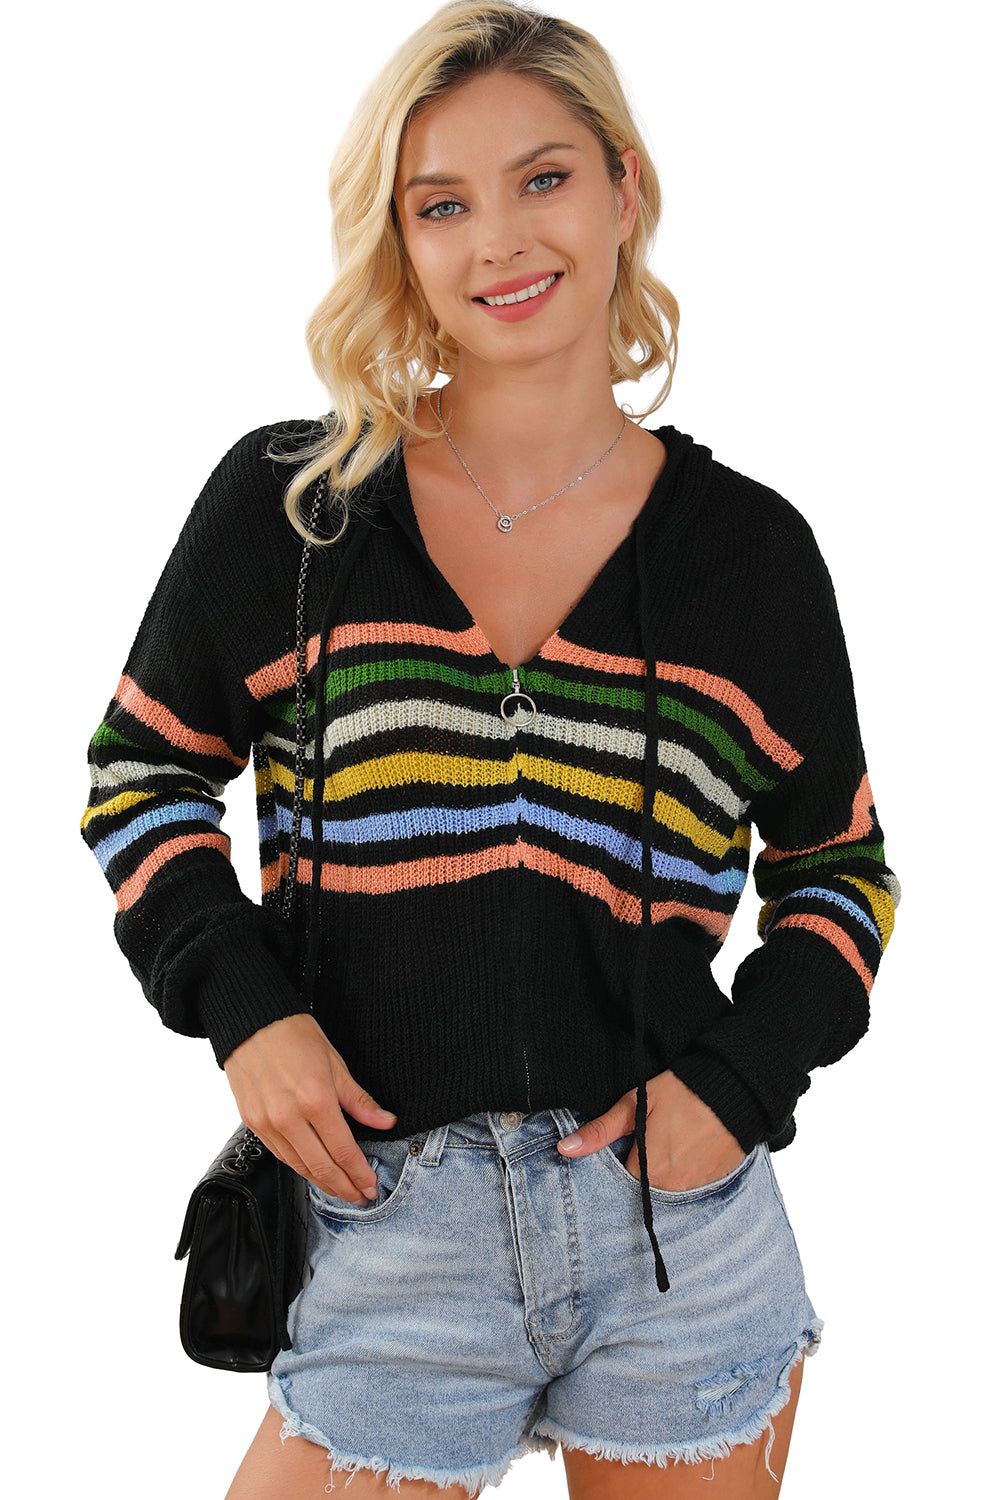 Black Striped Detail Zip Up Hooded Sweater Cardigan